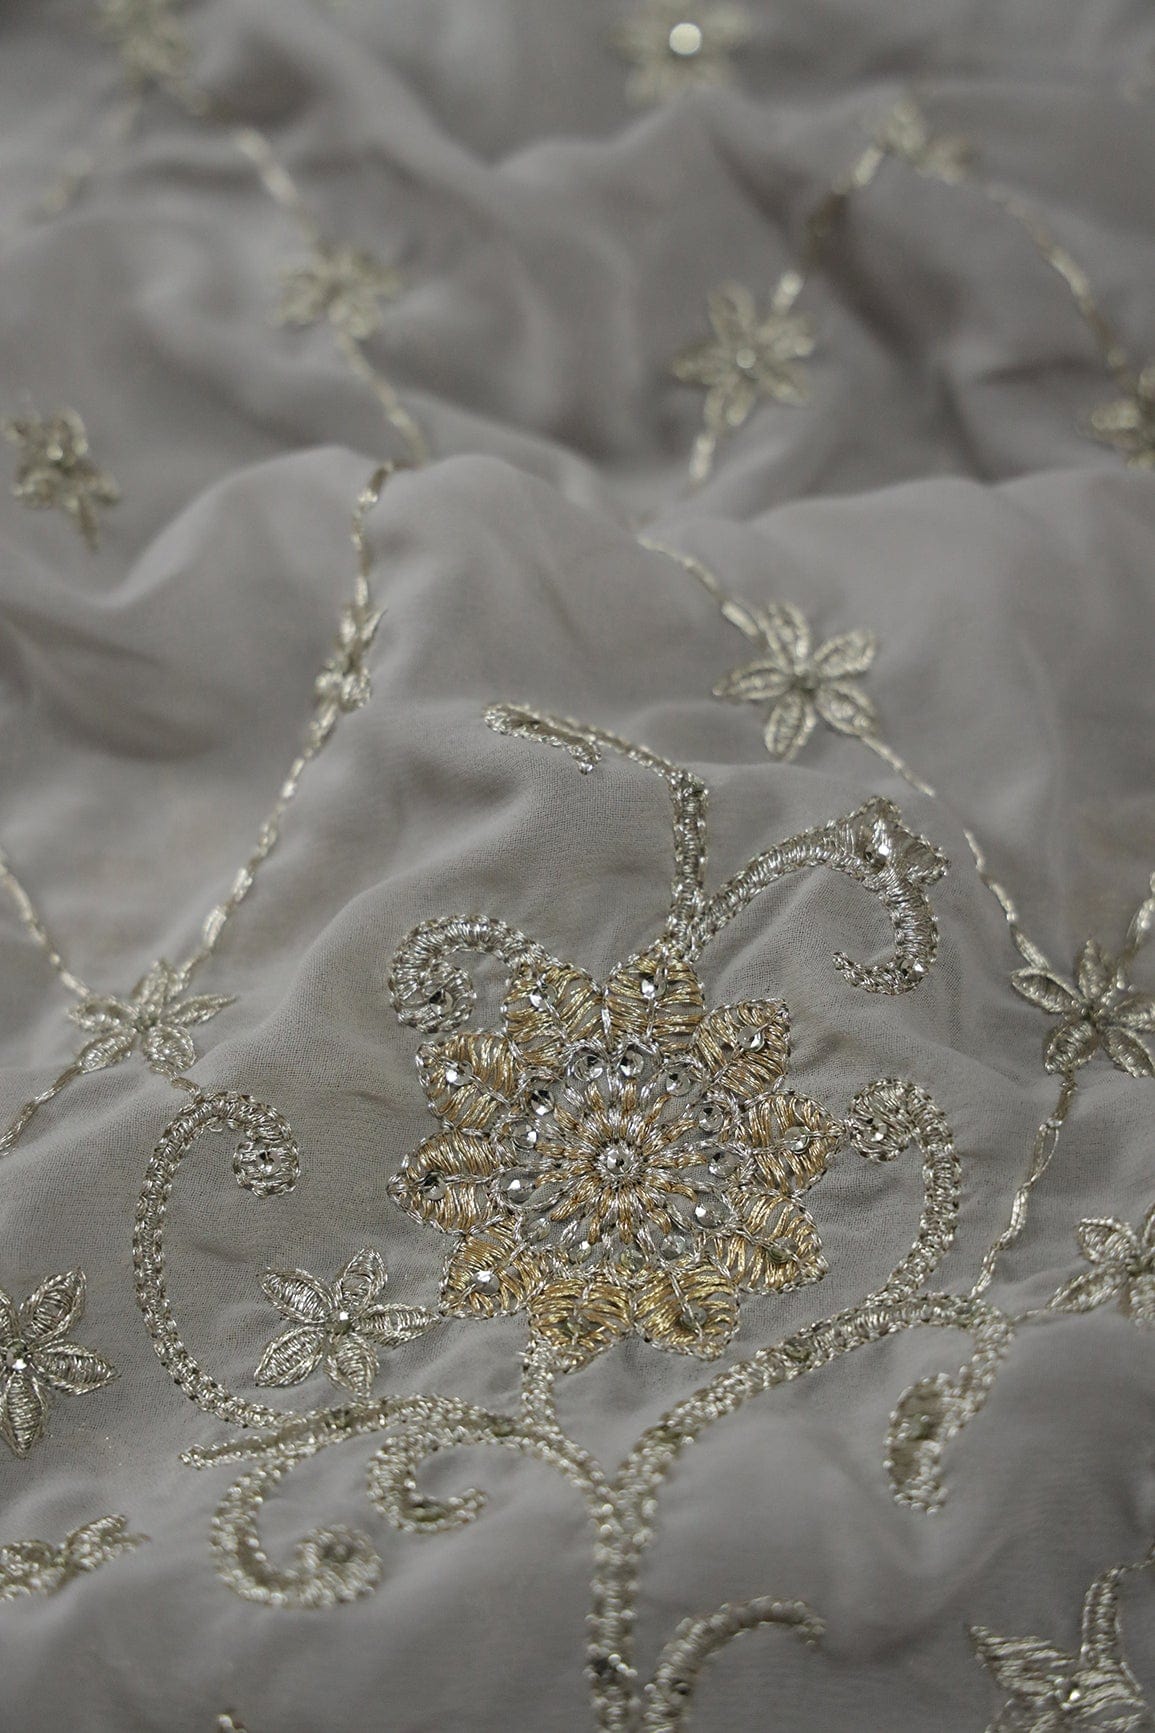 doeraa Embroidery Fabrics Big Width''56'' Gold And Silver Zari Floral Embroidery Work On Grey Georgette Fabric With Border